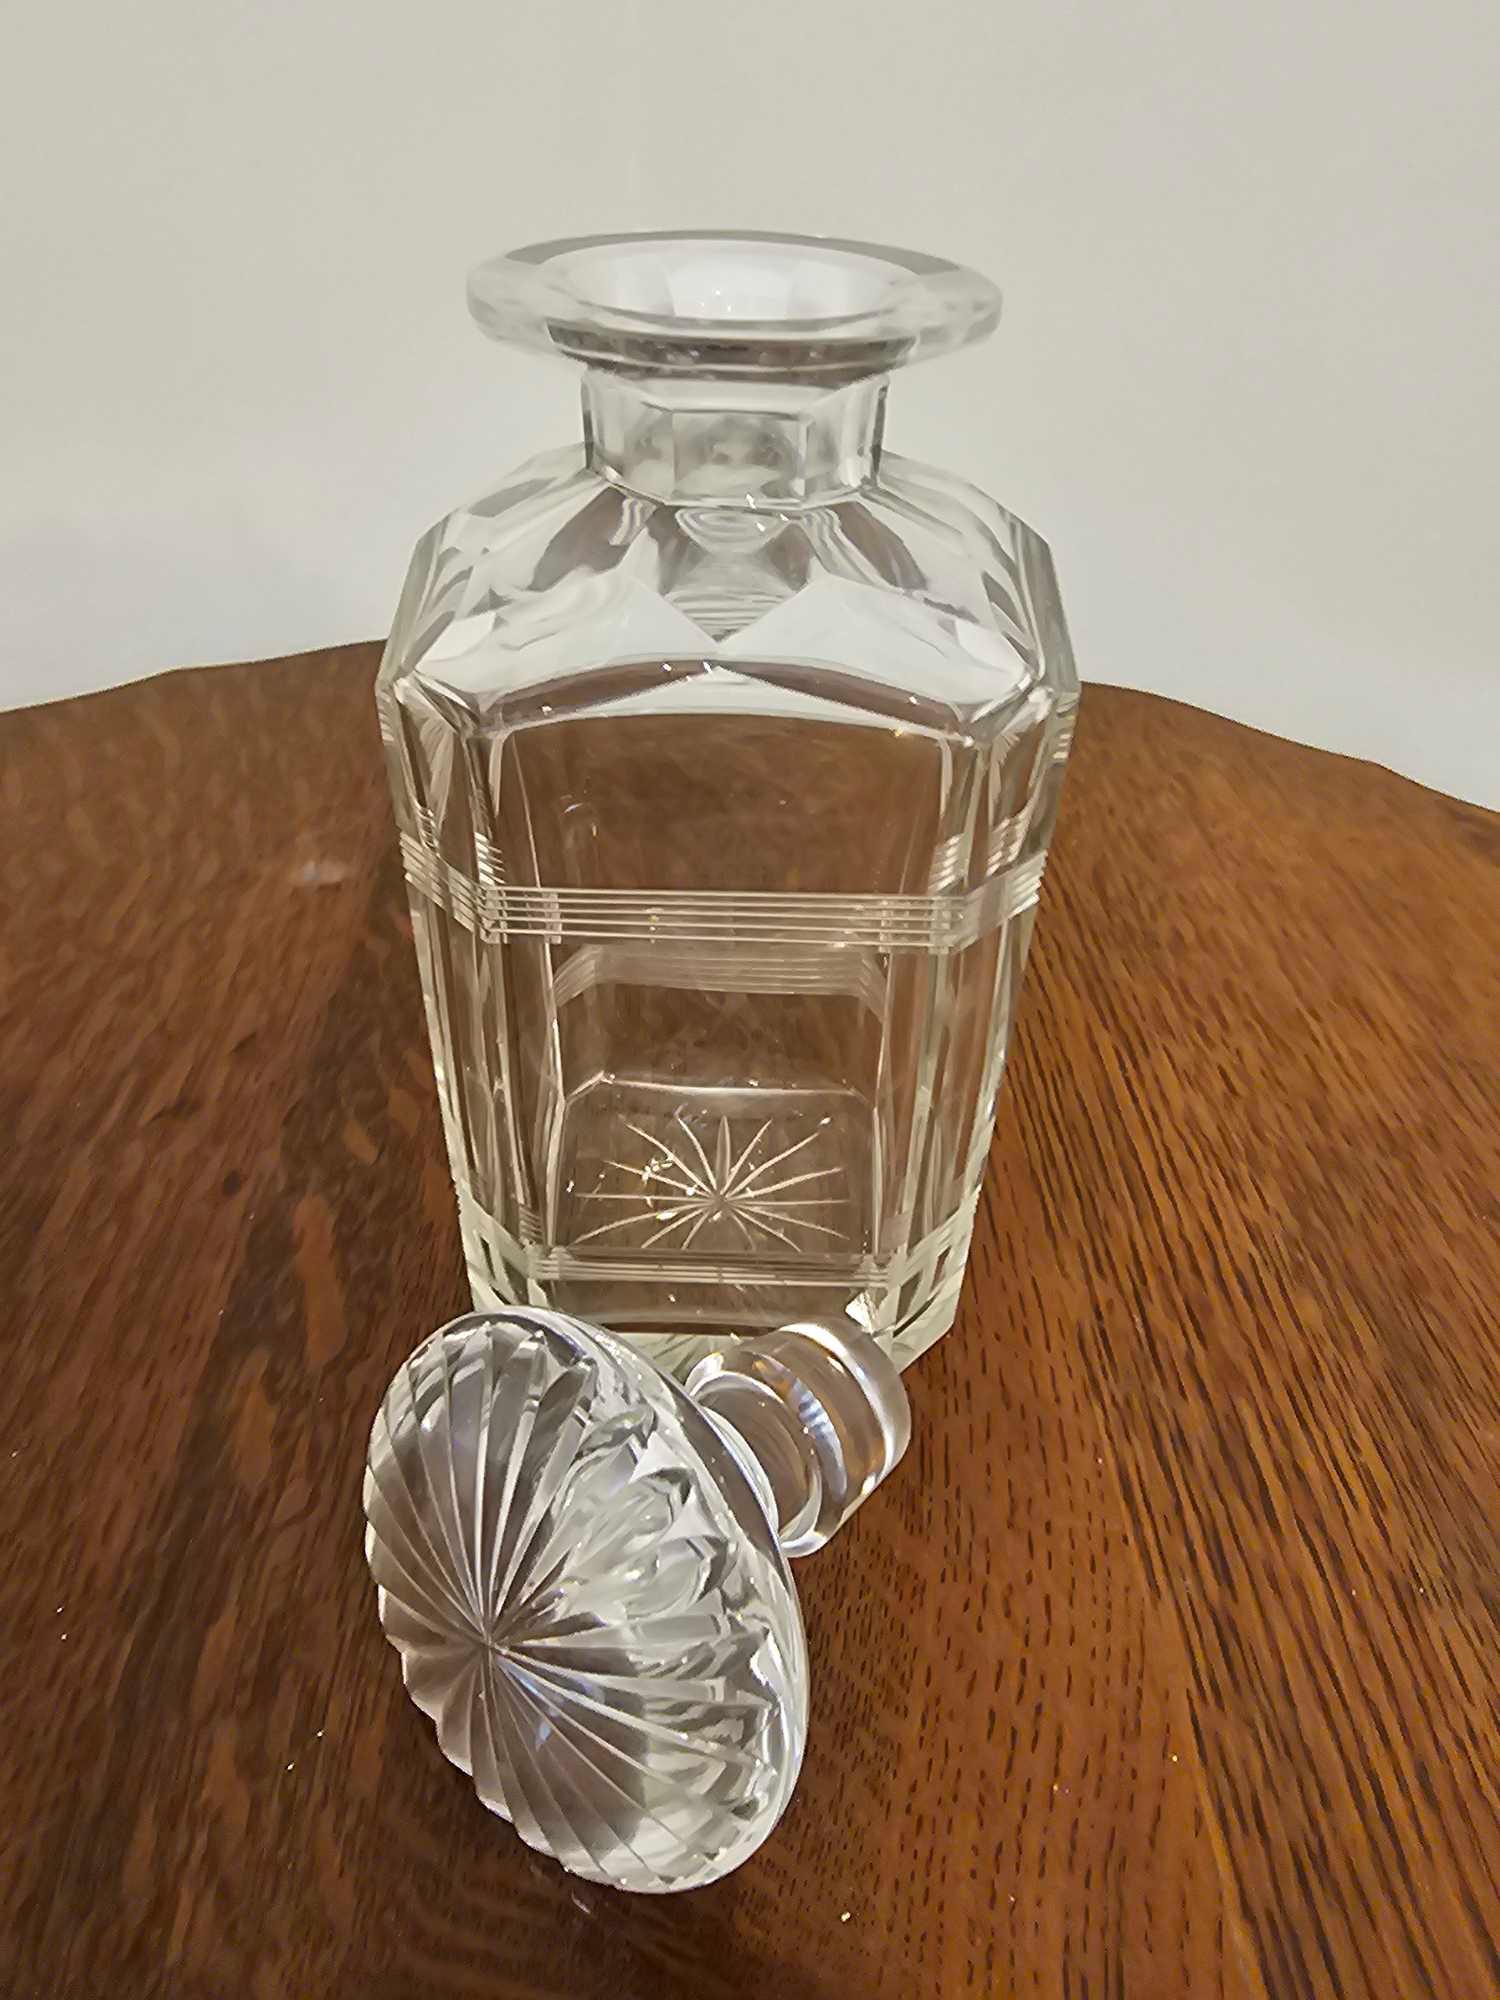 Royal Scot Crystal A Square Cut Spirit Decanter With Stopper 21cm - Image 5 of 6